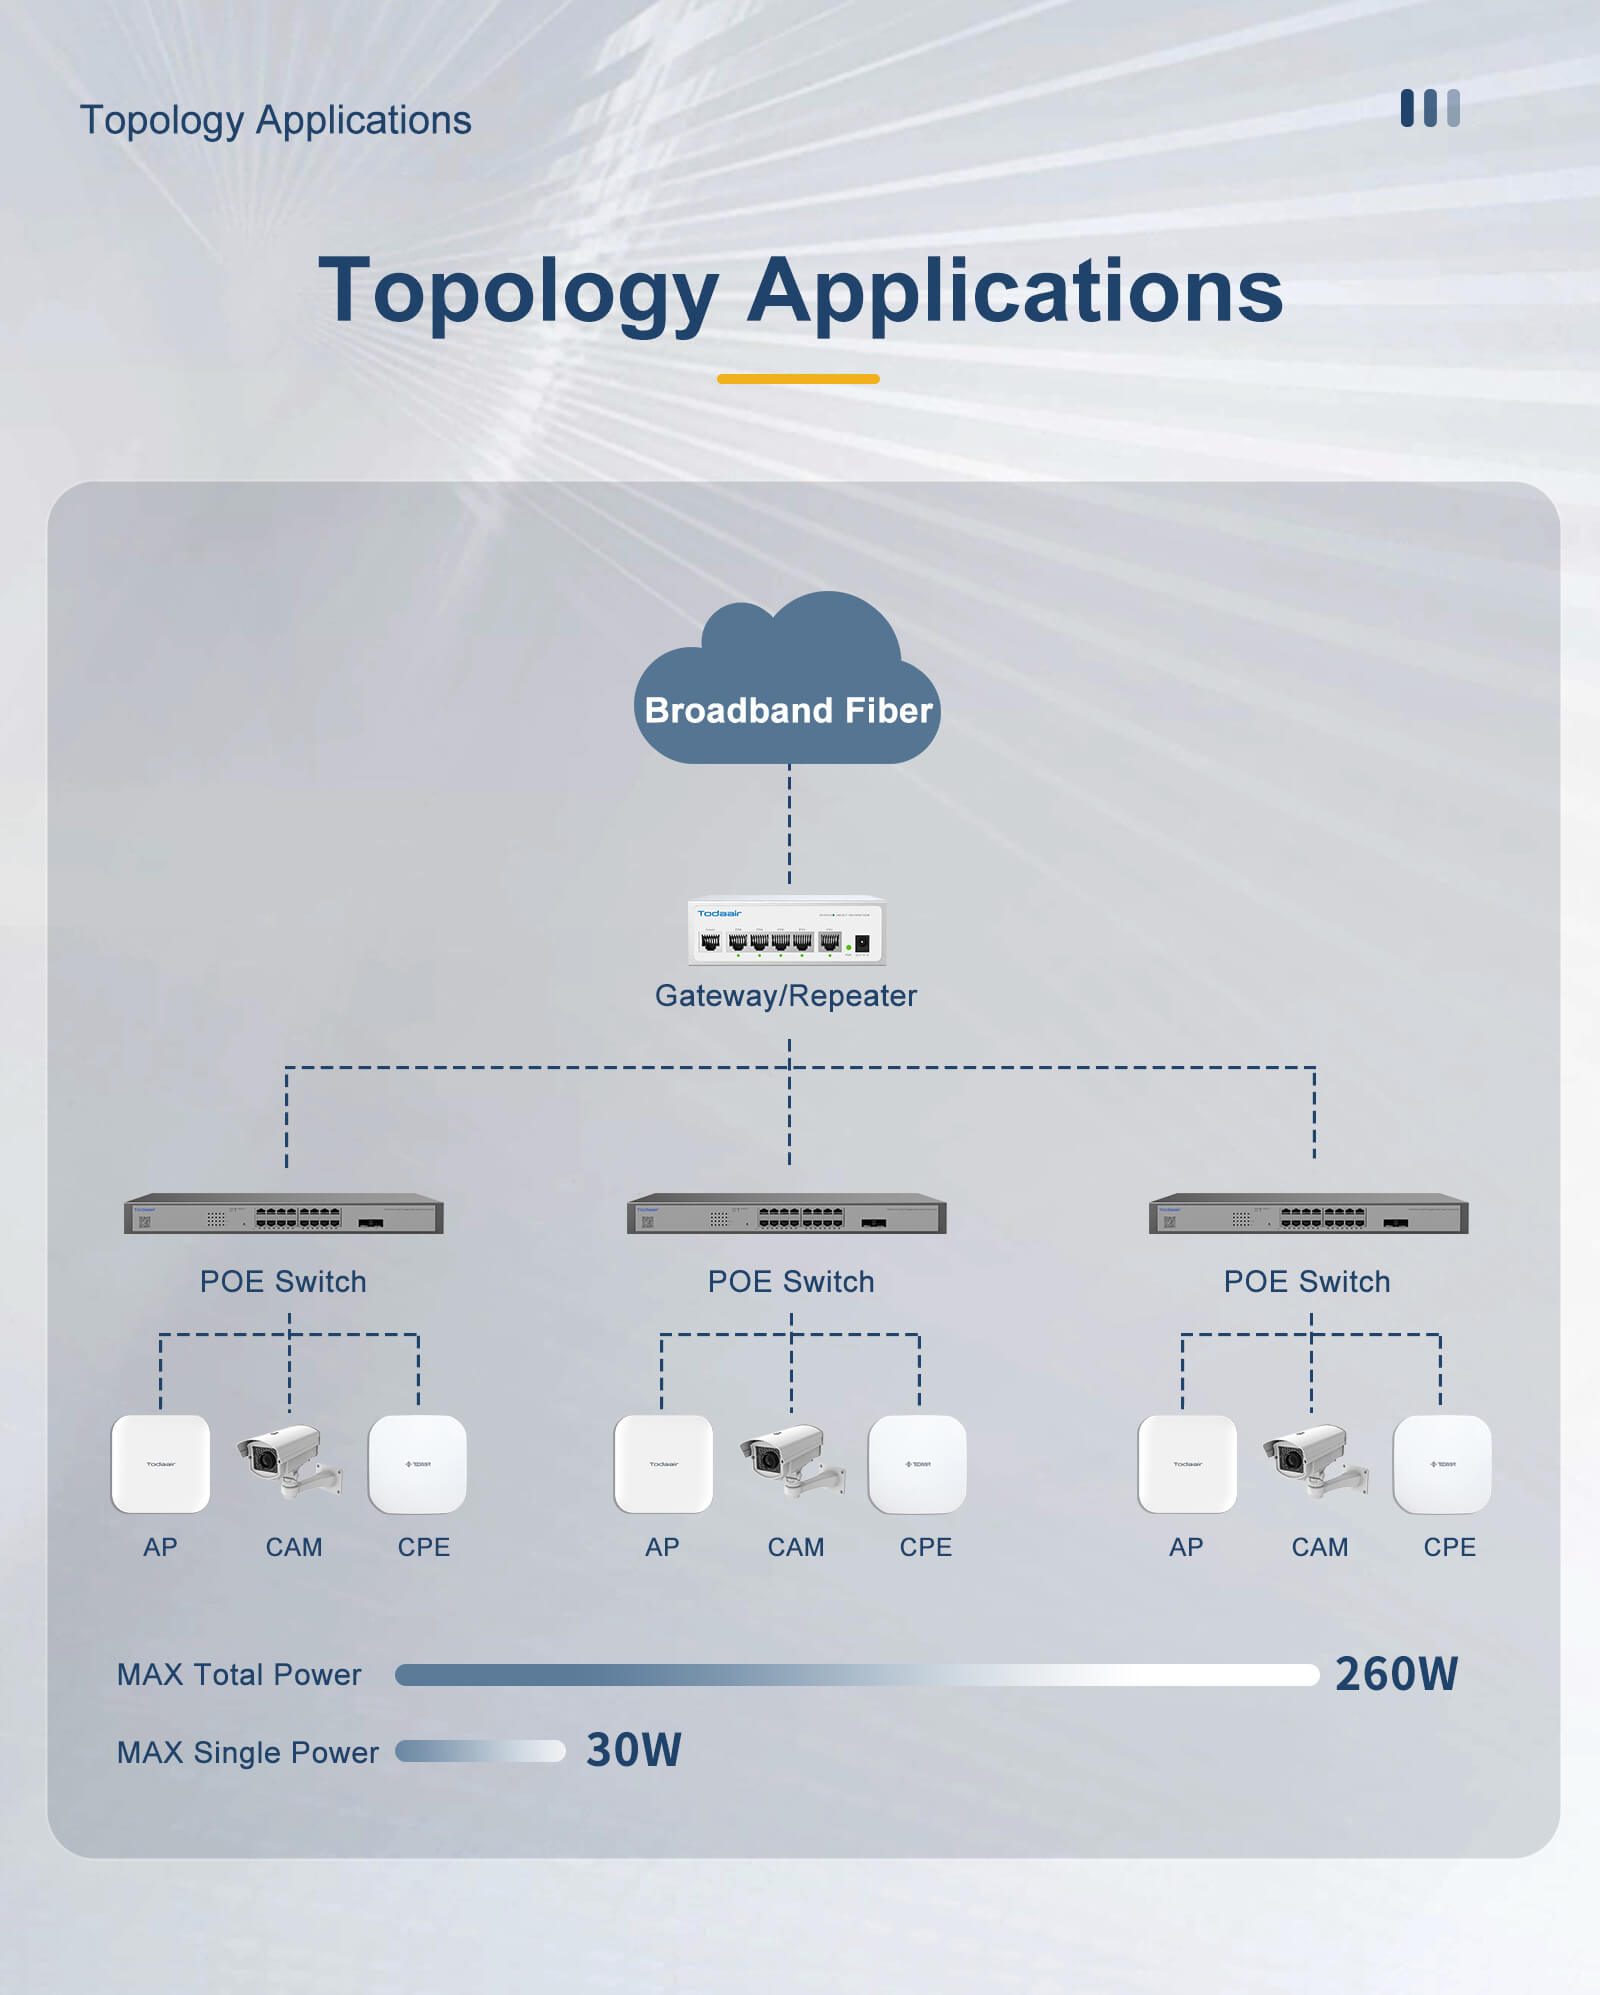 Poe network switch topology application